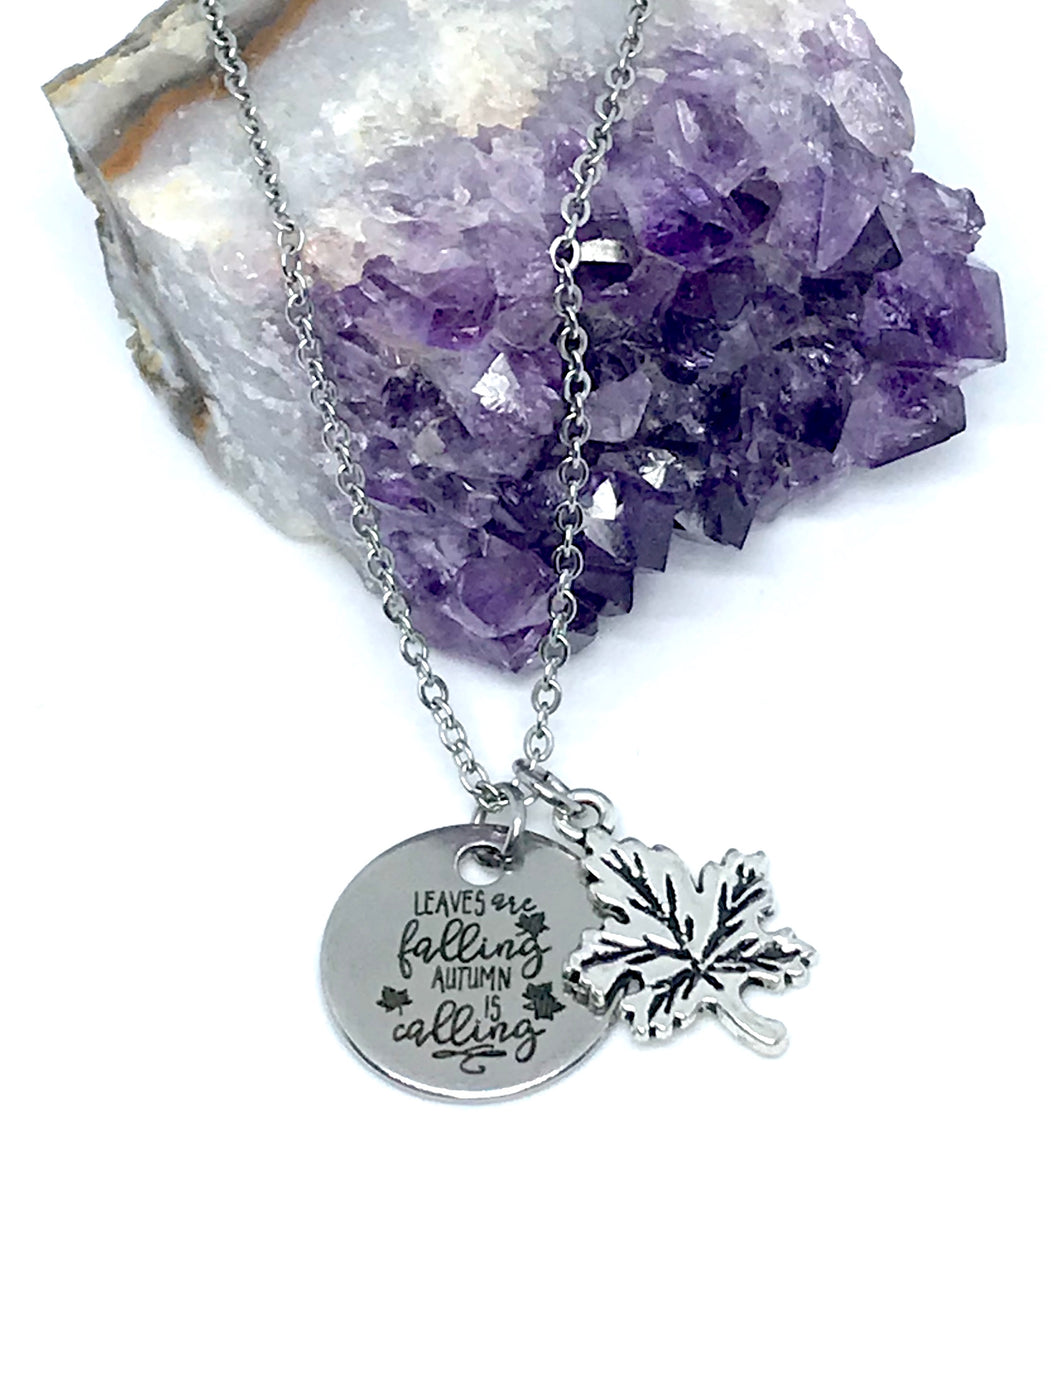 “The leaves are falling AUTUMN is calling” 3-in-1 Charm Necklace (Stainless Steel)